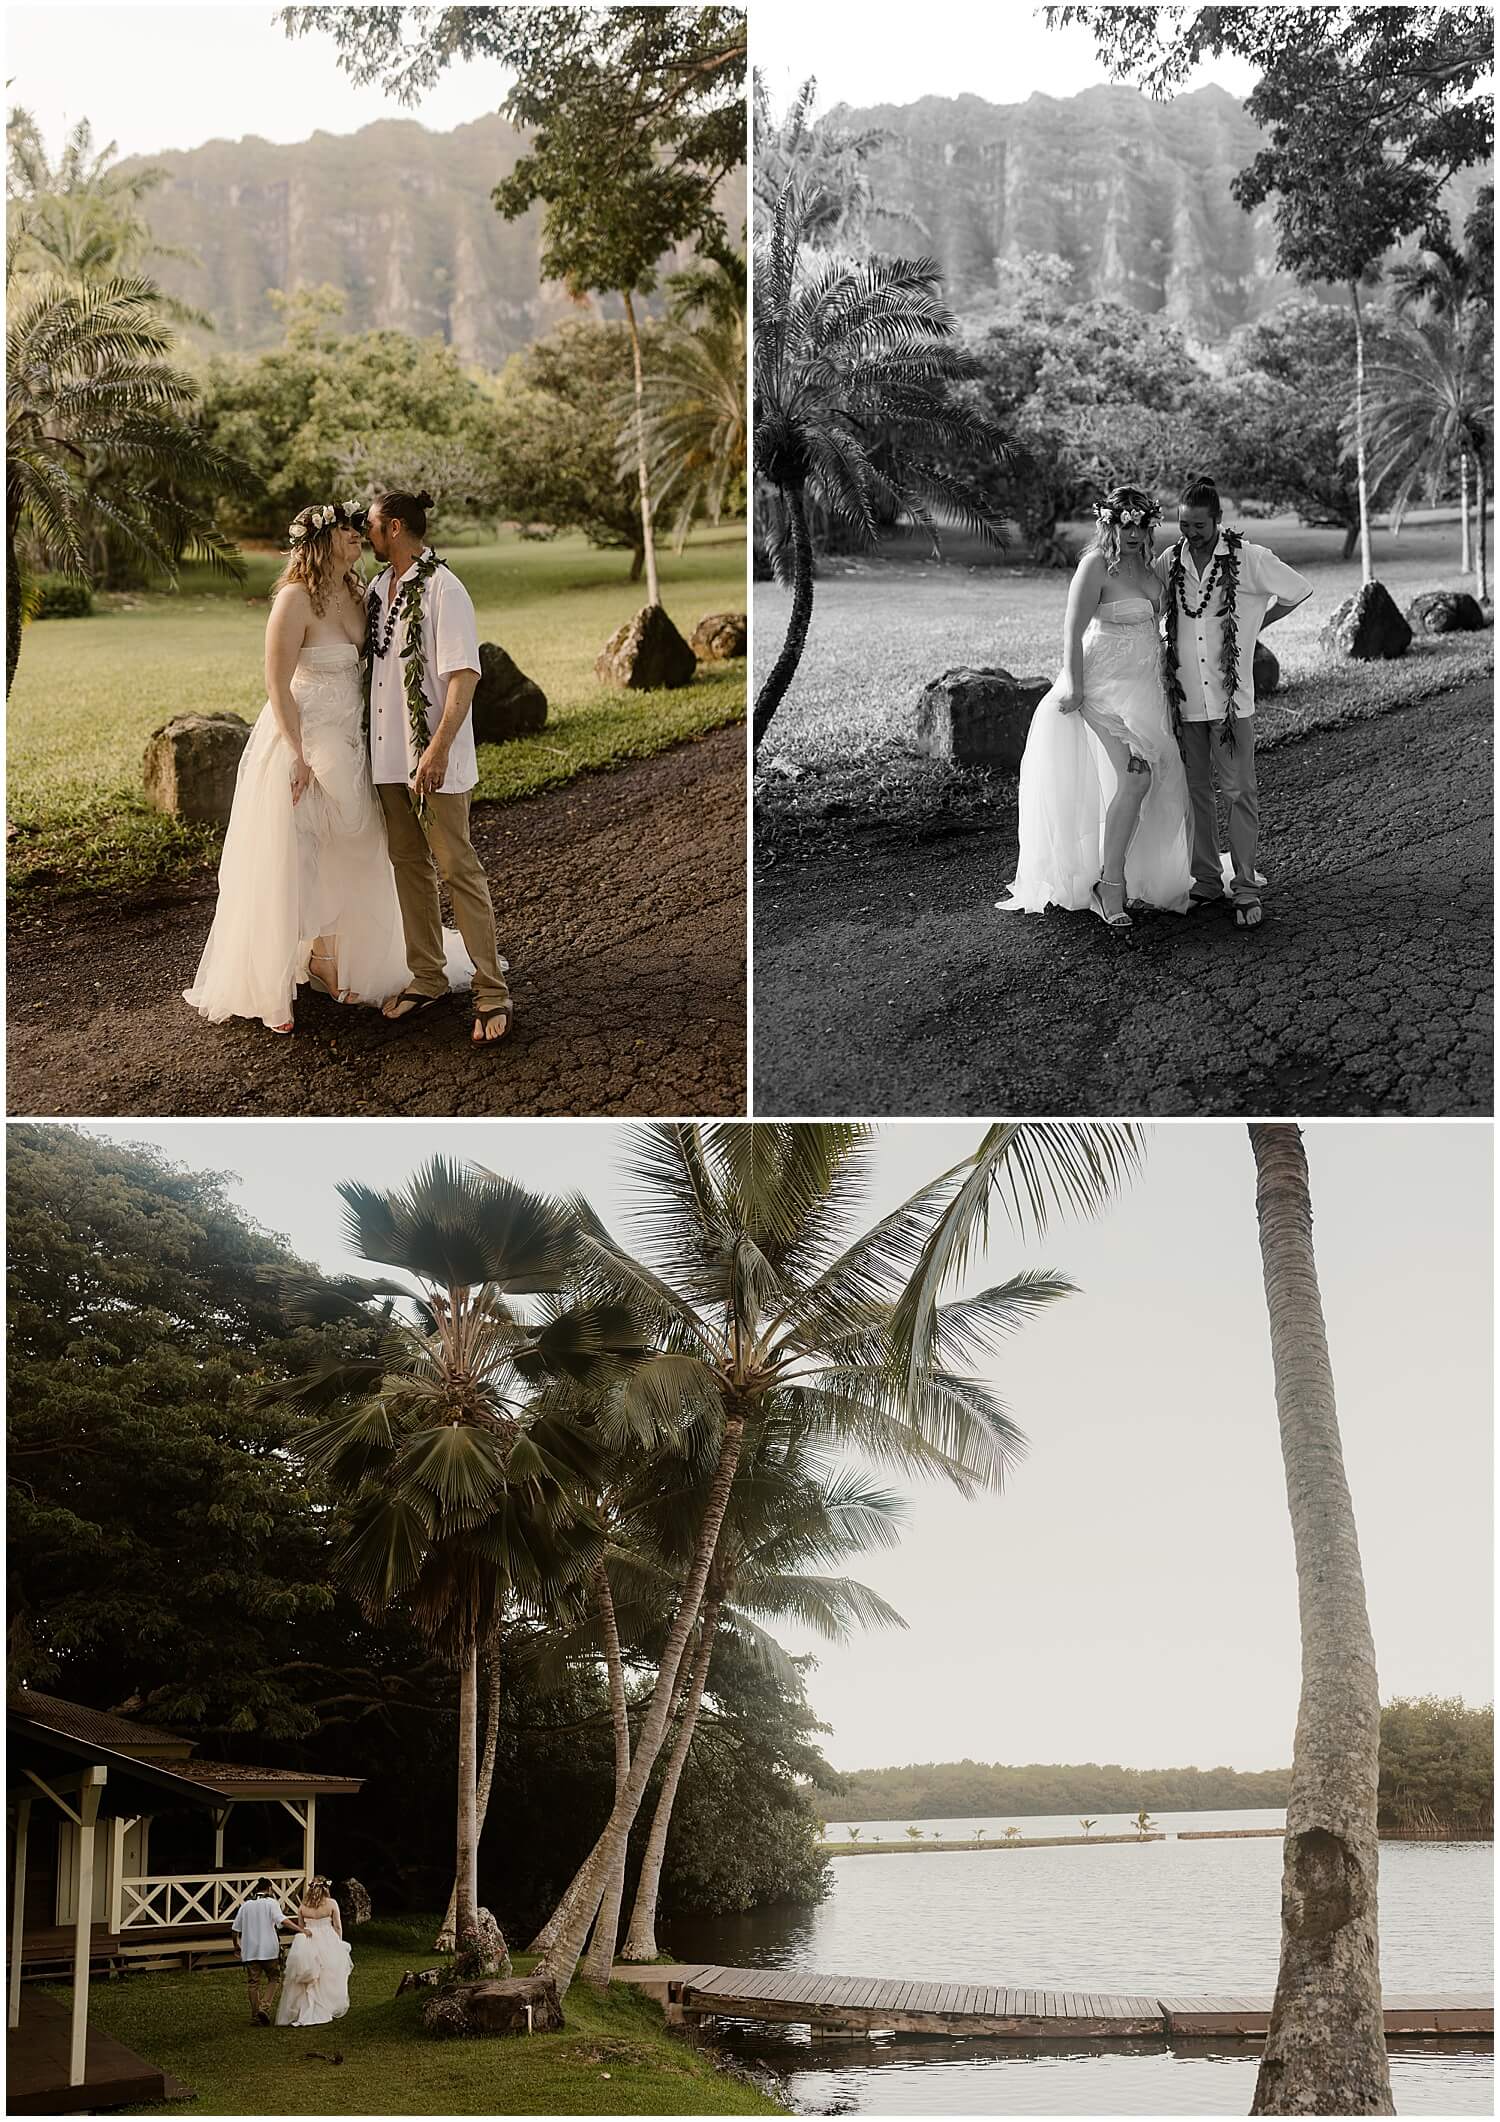 Walkway after ceremony for bride and groom with koolau mountain views along the water by Oahu wedding photographer 